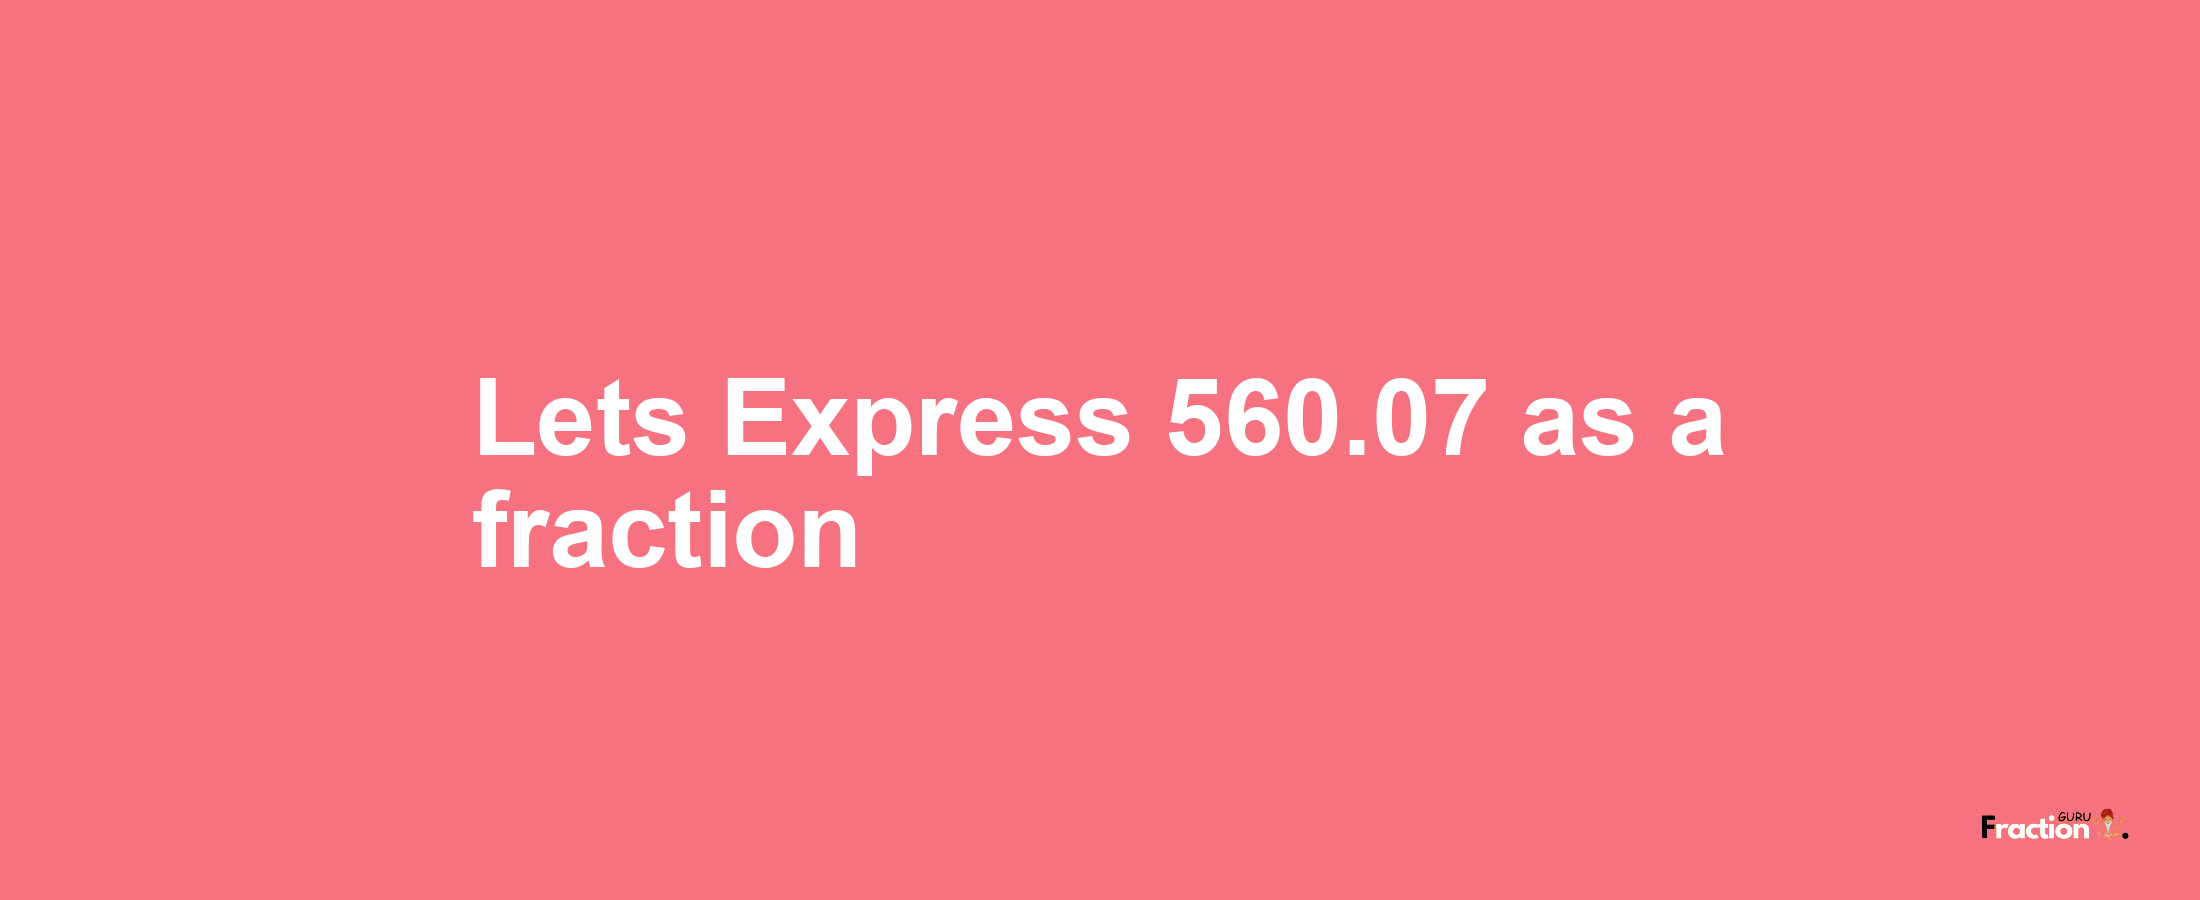 Lets Express 560.07 as afraction